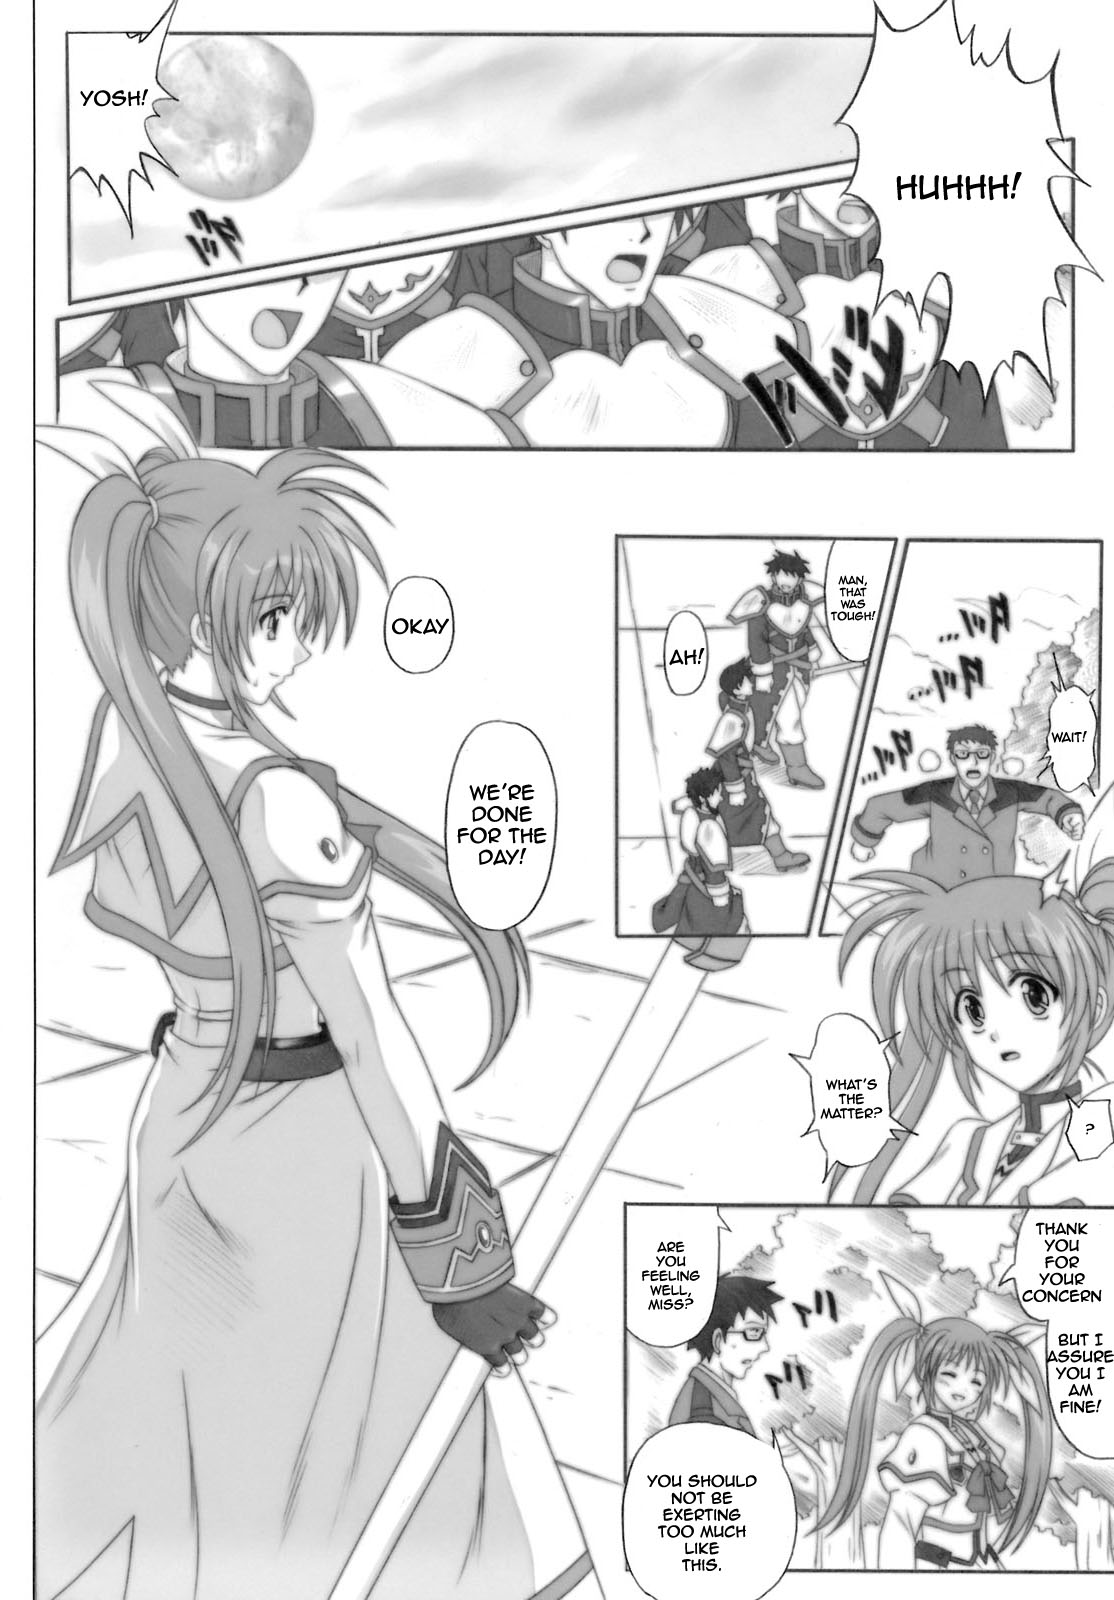 840 Color Classic Situation Note Extention (Mahou Shoujo Lyrical Nanoha) [English] [Rewrite] page 2 full